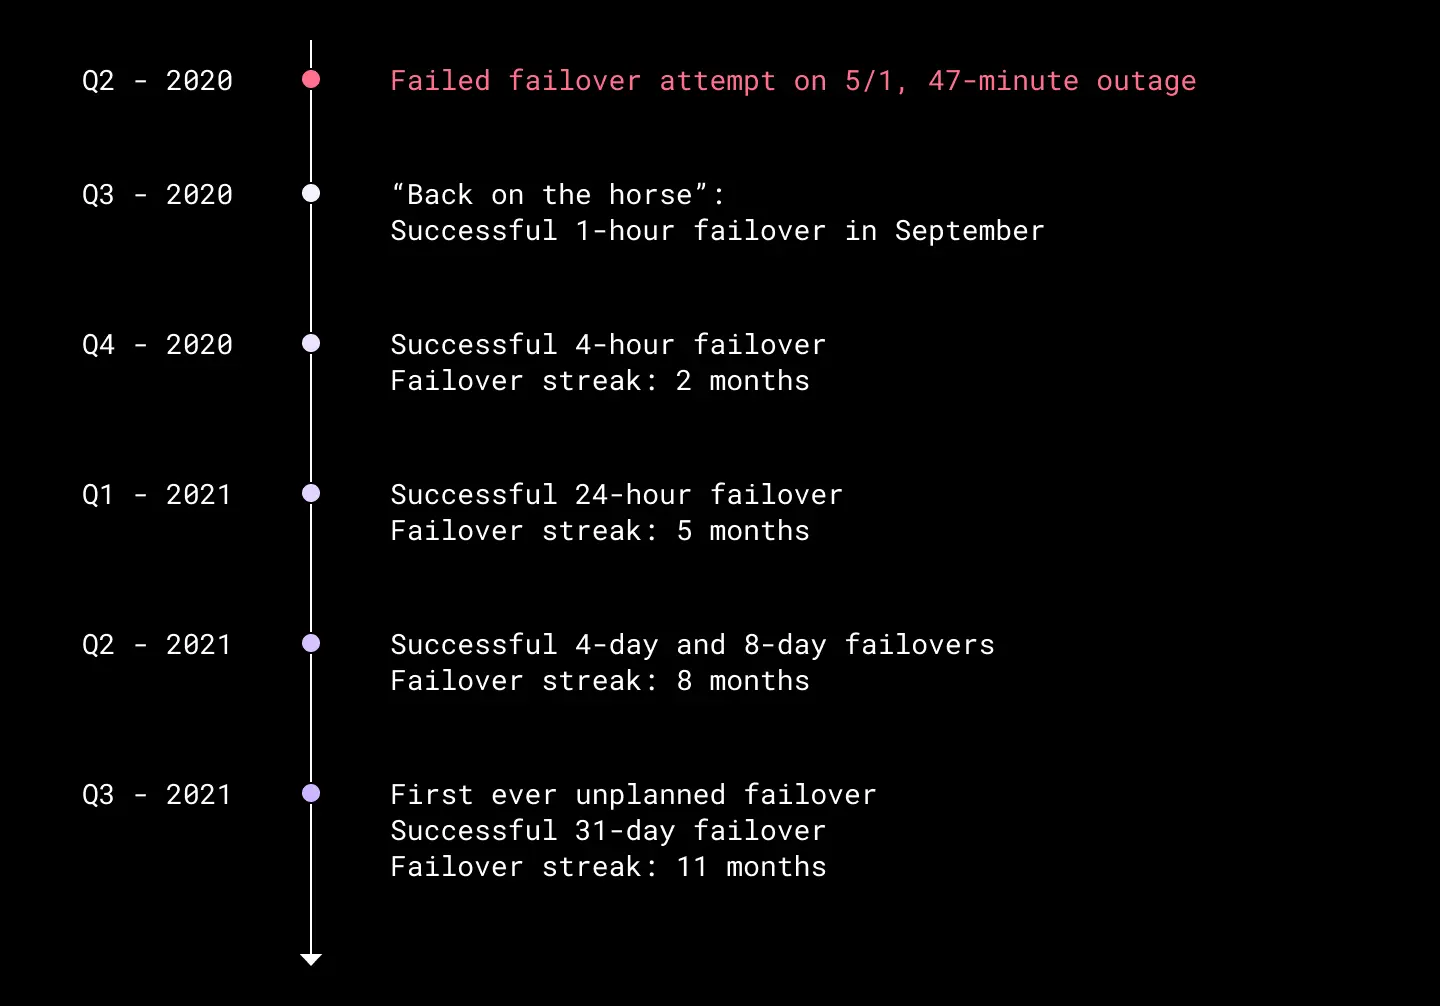 A history of our incremental progress on failover exercises with longer duration of stay.